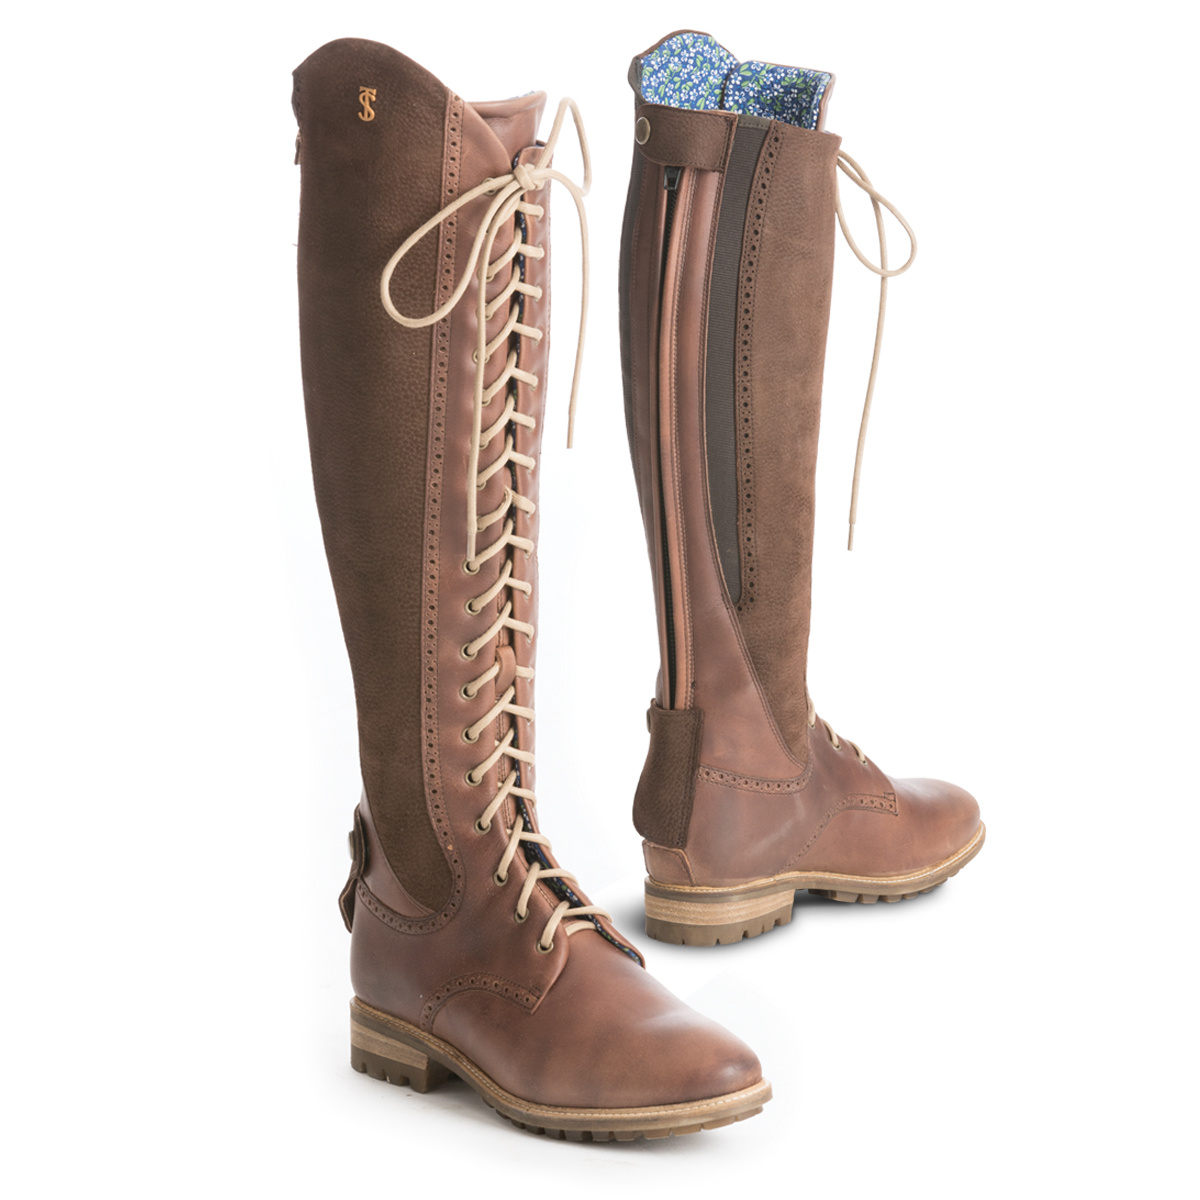 shires moretta nella tall full zip waterproof country boots